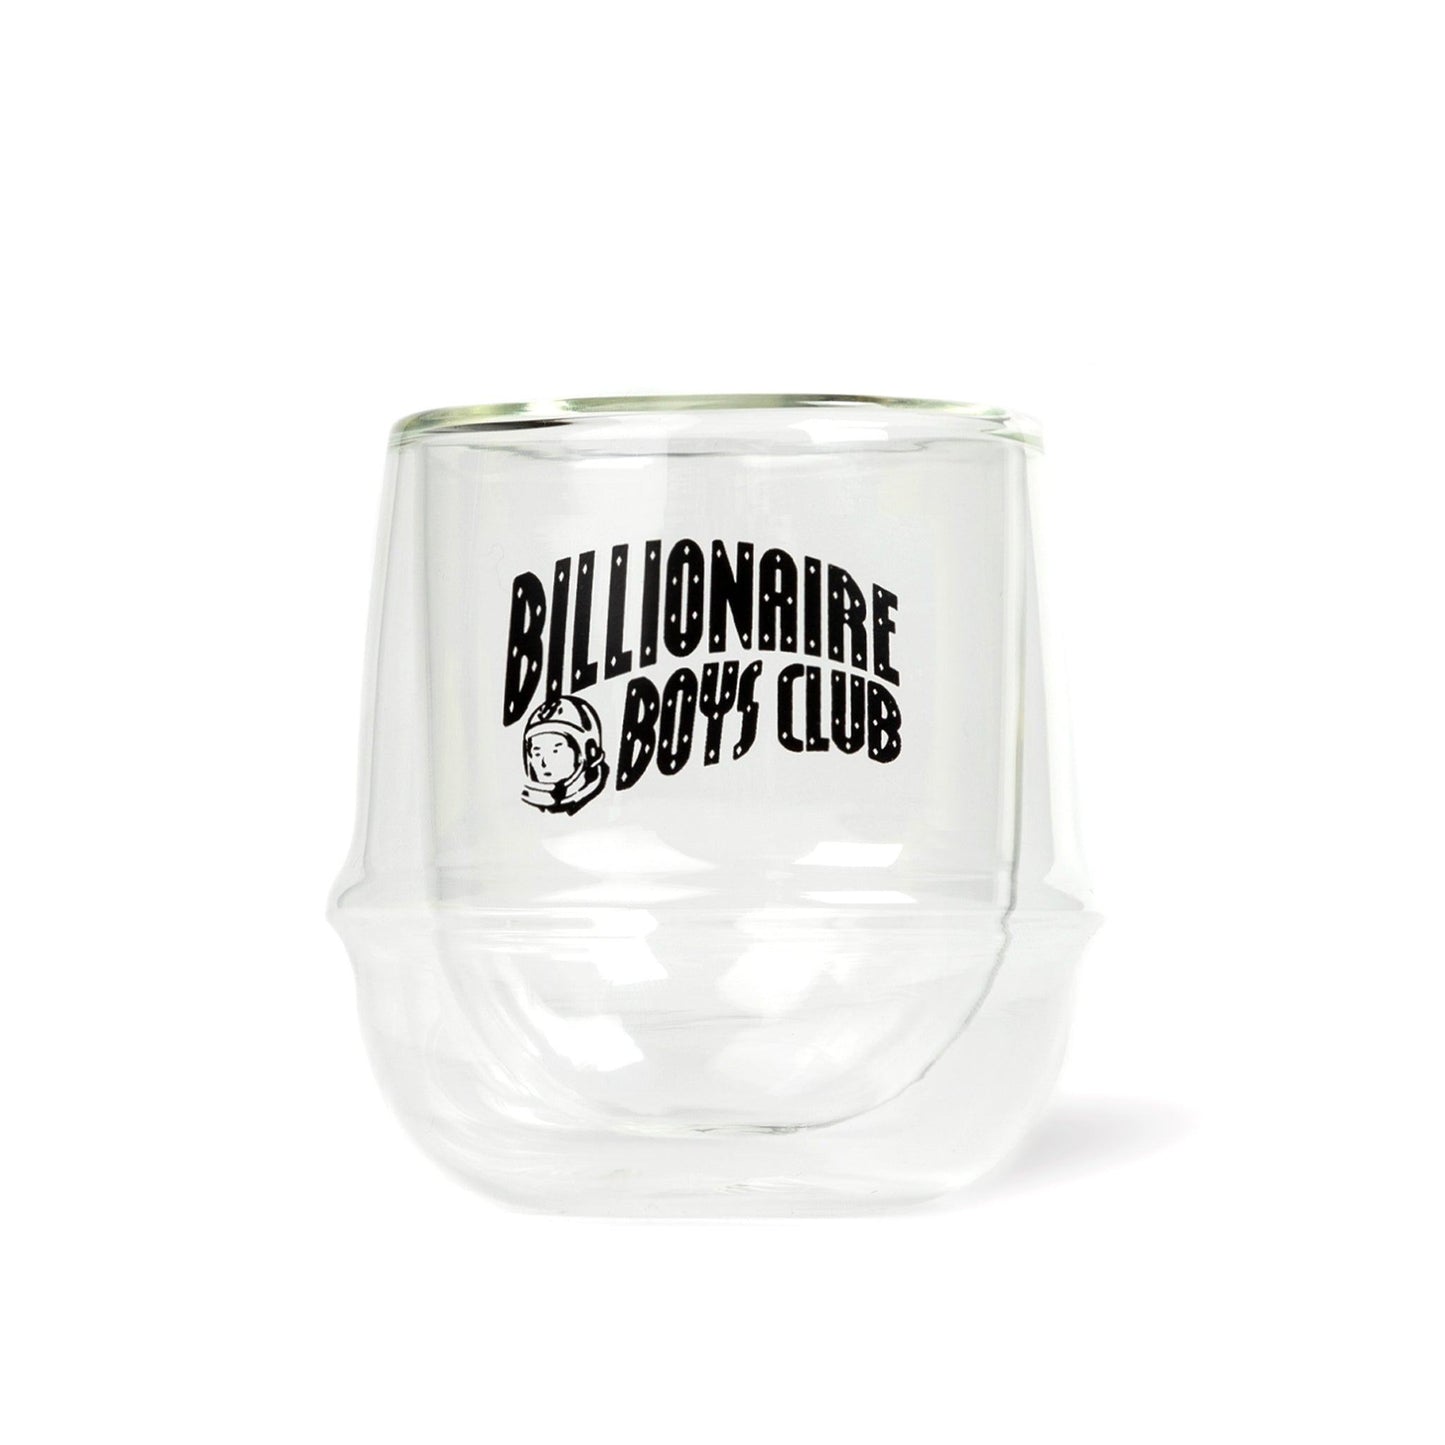 KINTO DOUBLE WALL COFFEE CUP - Billionaire Boys Club Exclusives